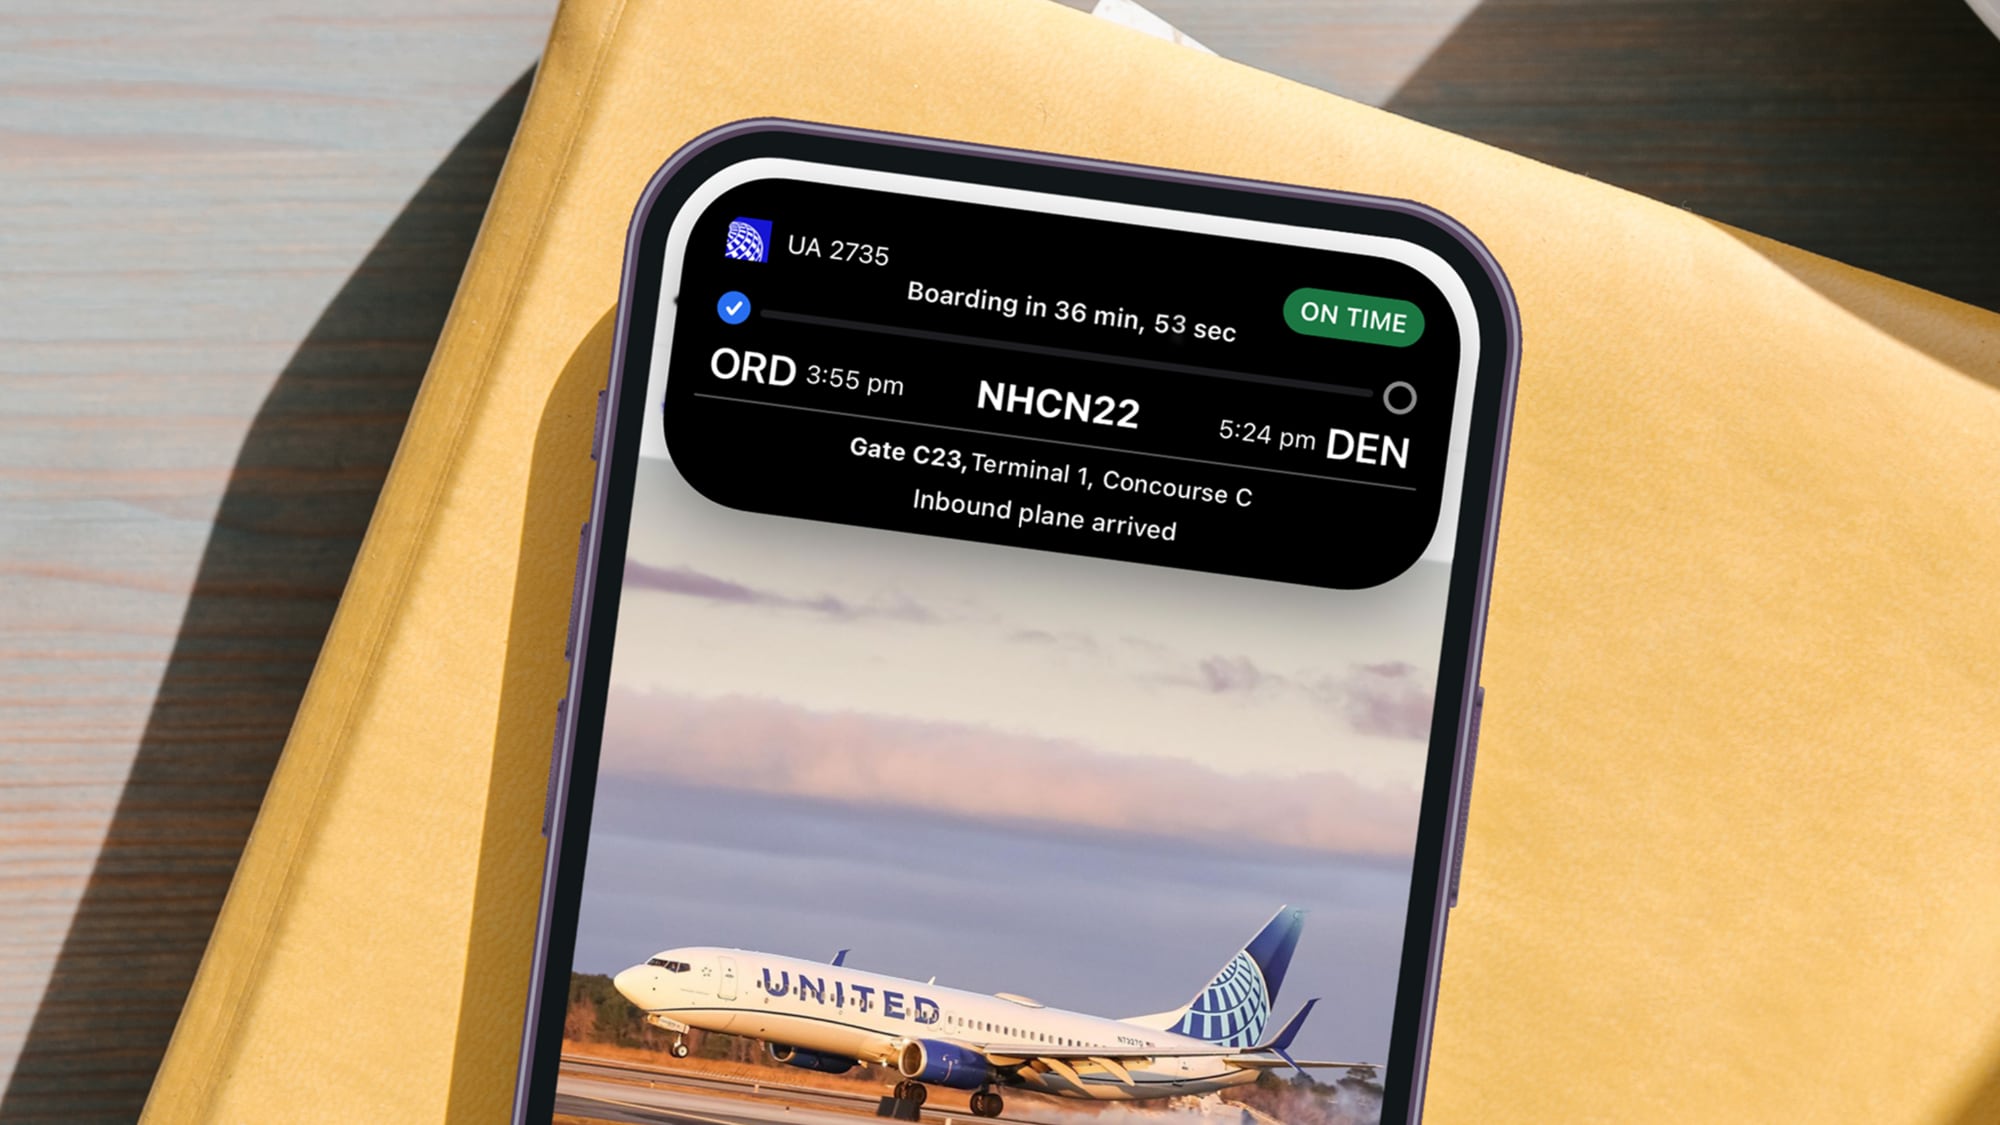 United Airlines Adds Live Activities and Dynamic Island Support for Flight Tracking